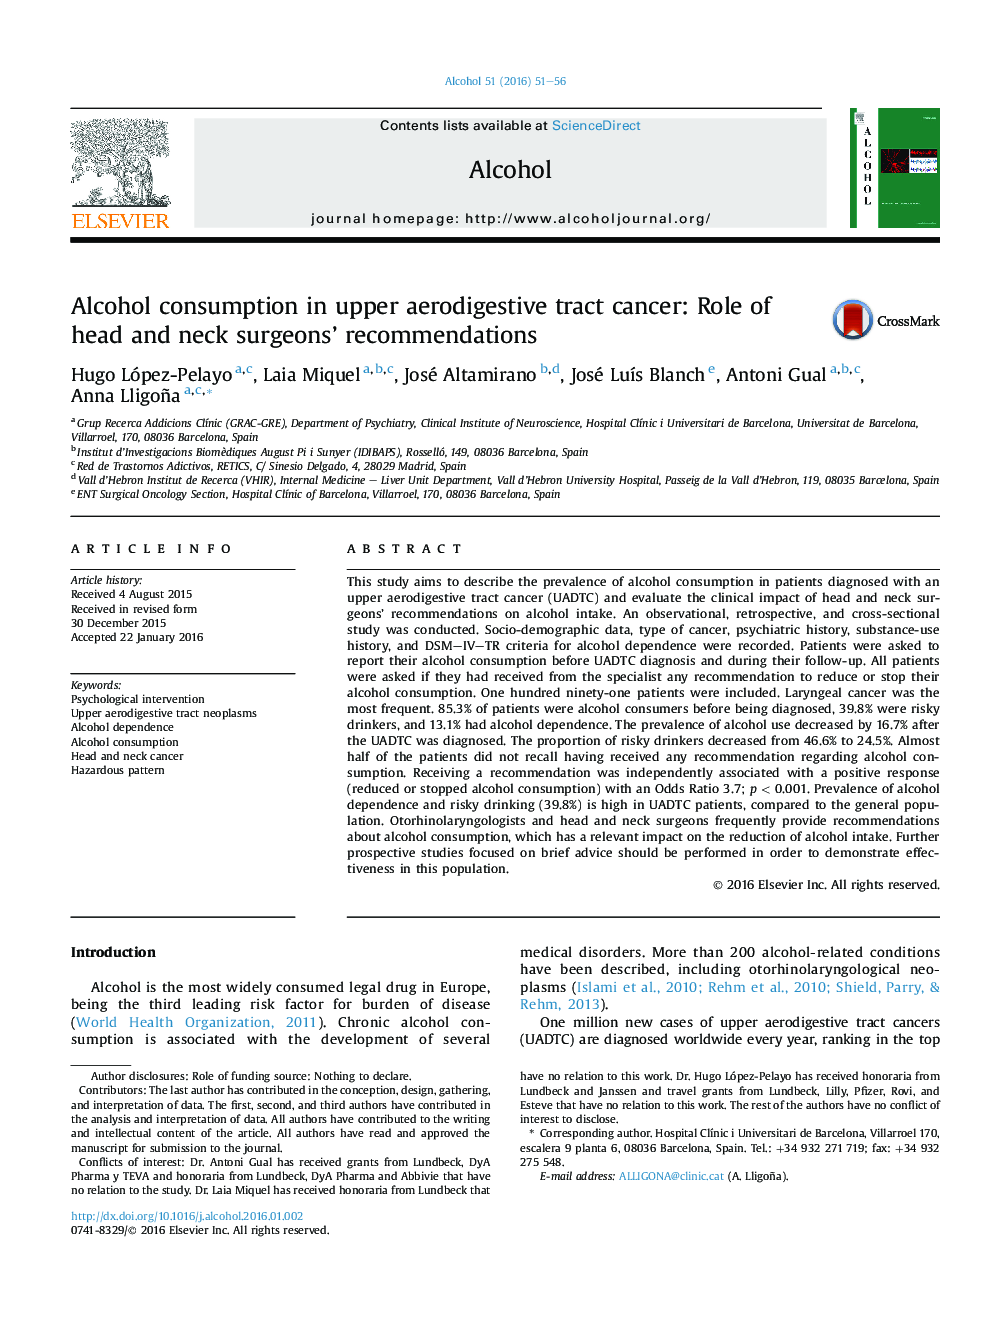 Alcohol consumption in upper aerodigestive tract cancer: Role of head and neck surgeons' recommendations 